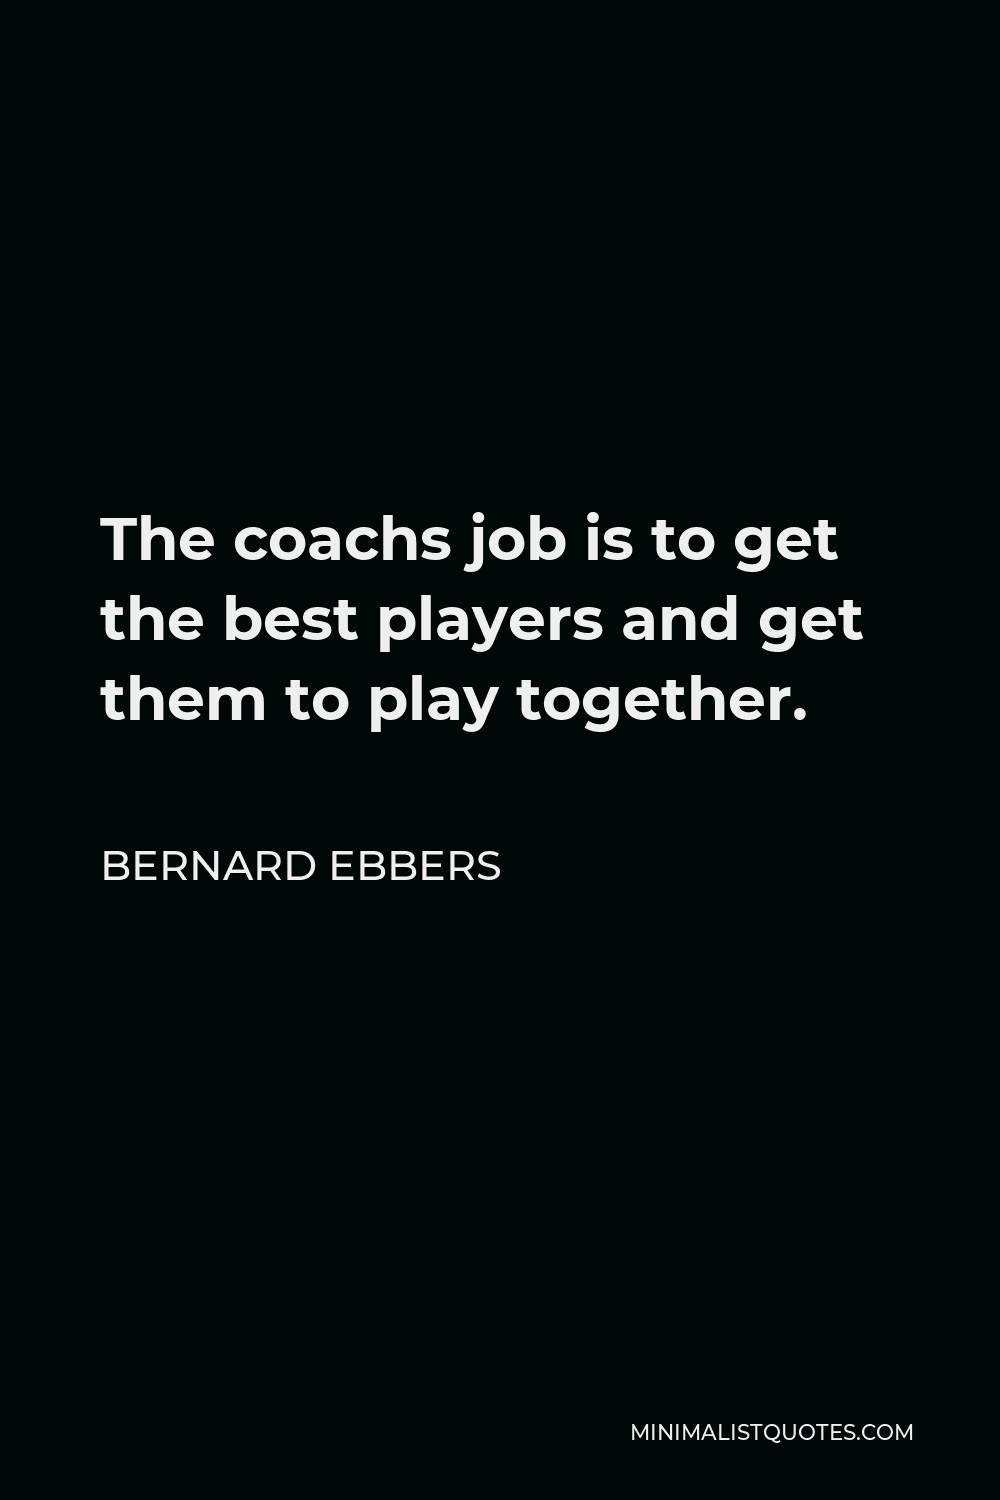 Bernard Ebbers Quote - The coachs job is to get the best players and get them to play together.